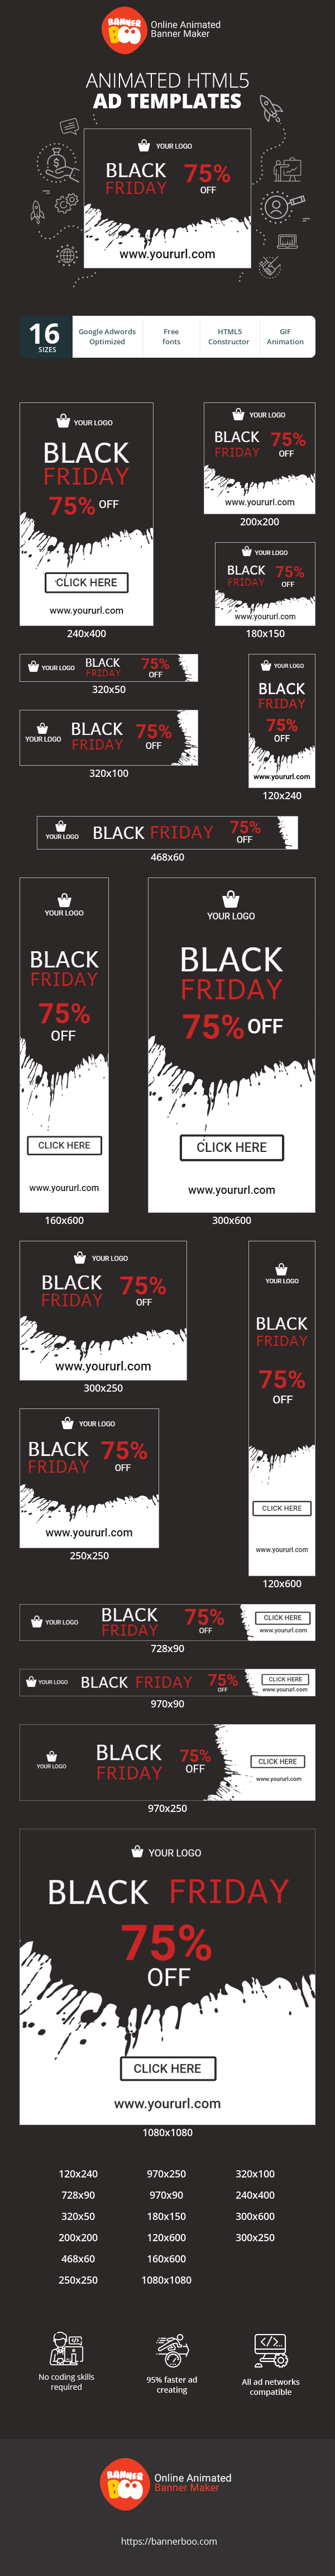 Banner ad template — Black Friday Sale — 75% OFF